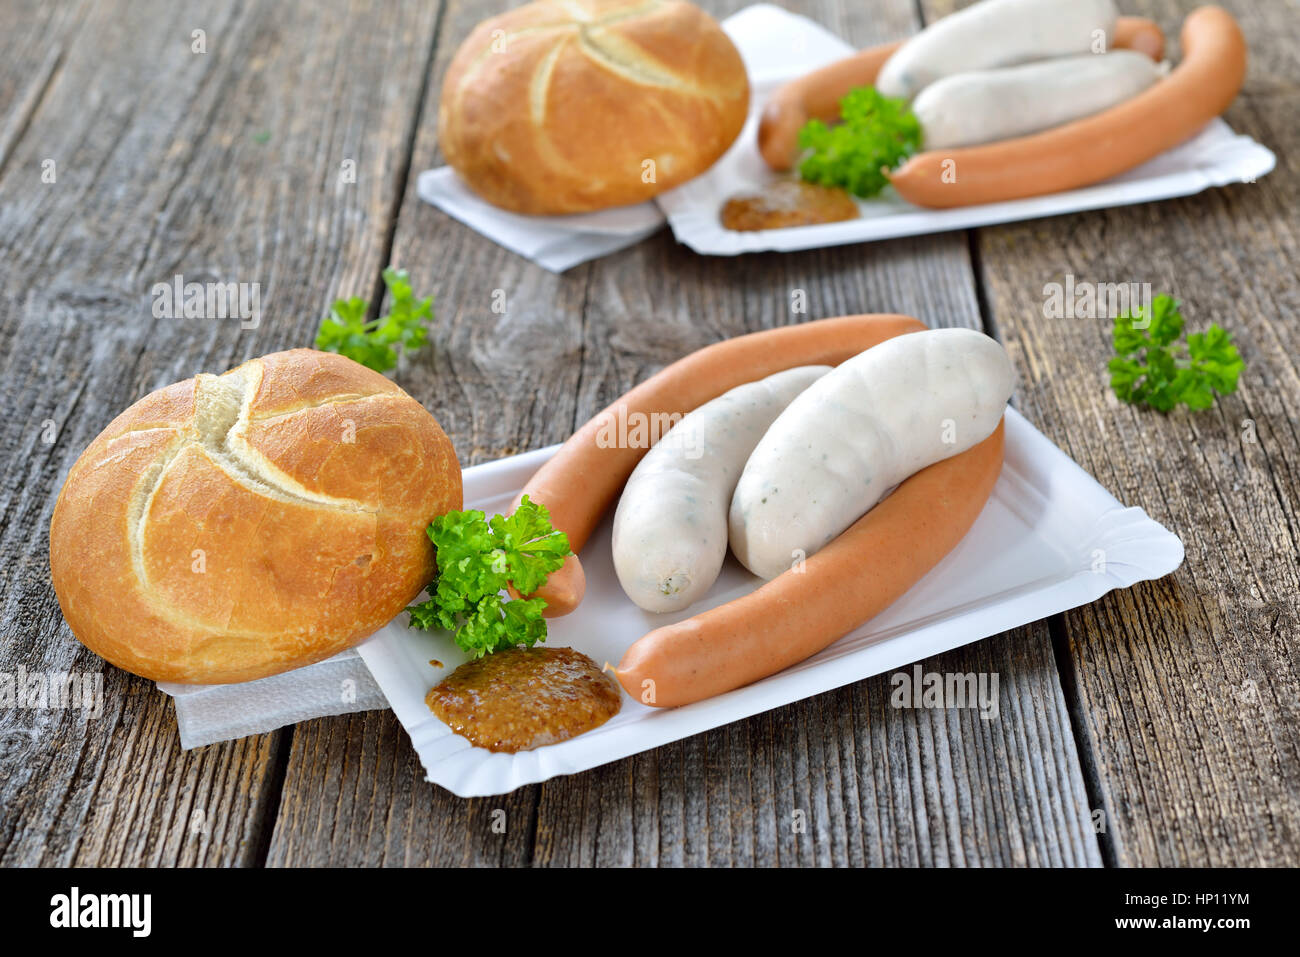 German street food: Bavarian white sausages and wieners with a fresh roll and sweet mustard on a paper plate Stock Photo